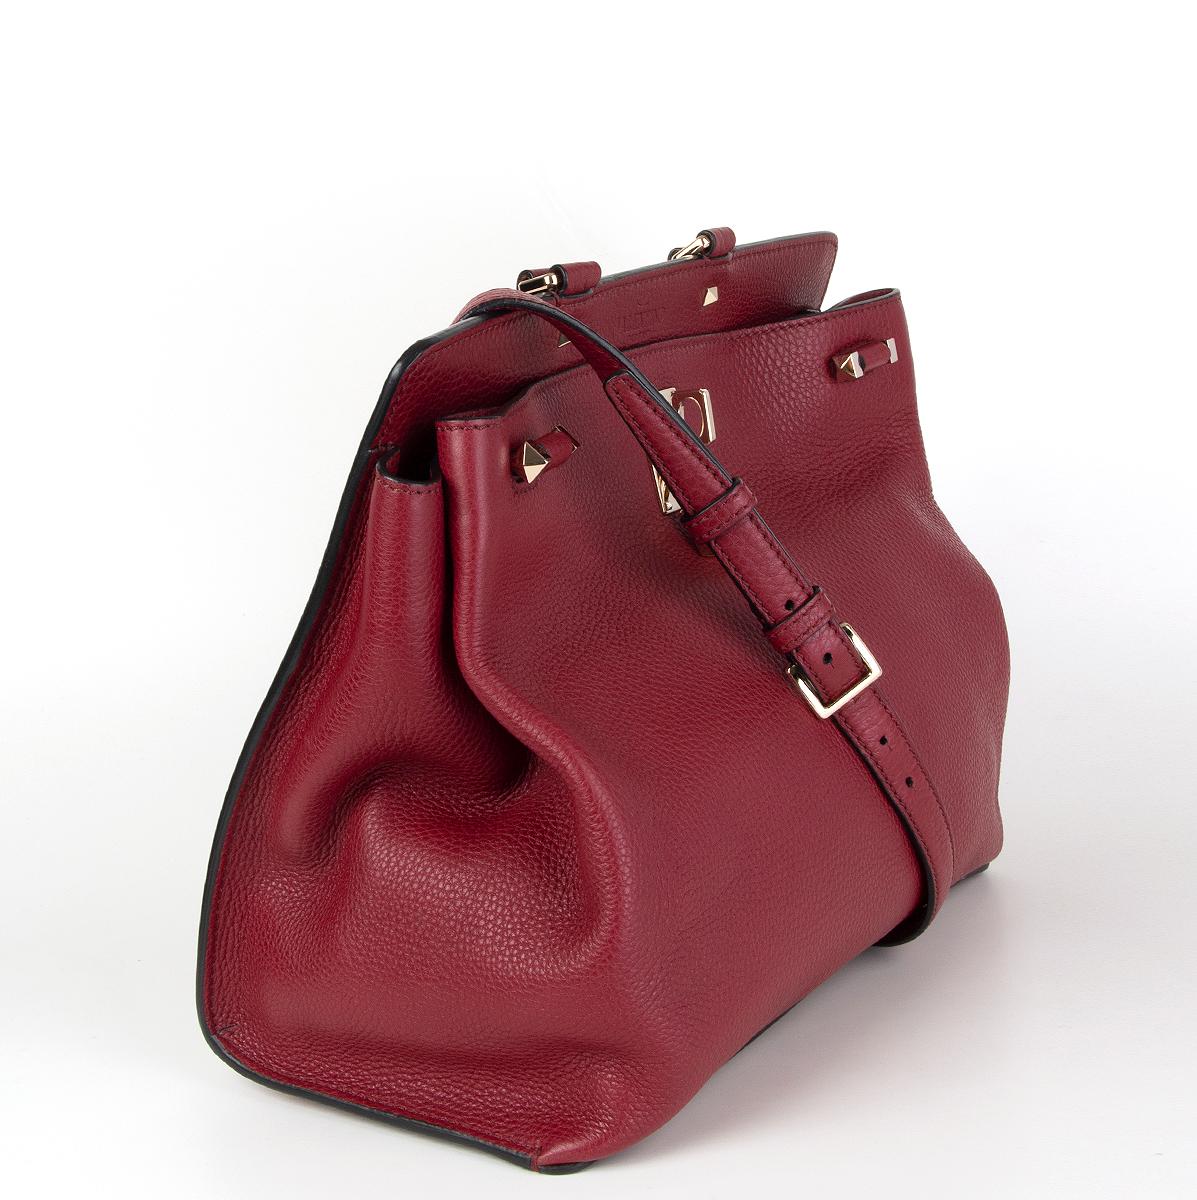 Valentino Garavani 'Joylock' medium top handle shoulder bag in burgundy grained calfskin featuring light gold-tone hardware and lock. Open pocket at the back. The bag can be carried by hand thanks to the top single handle or worn as a shoulder bag